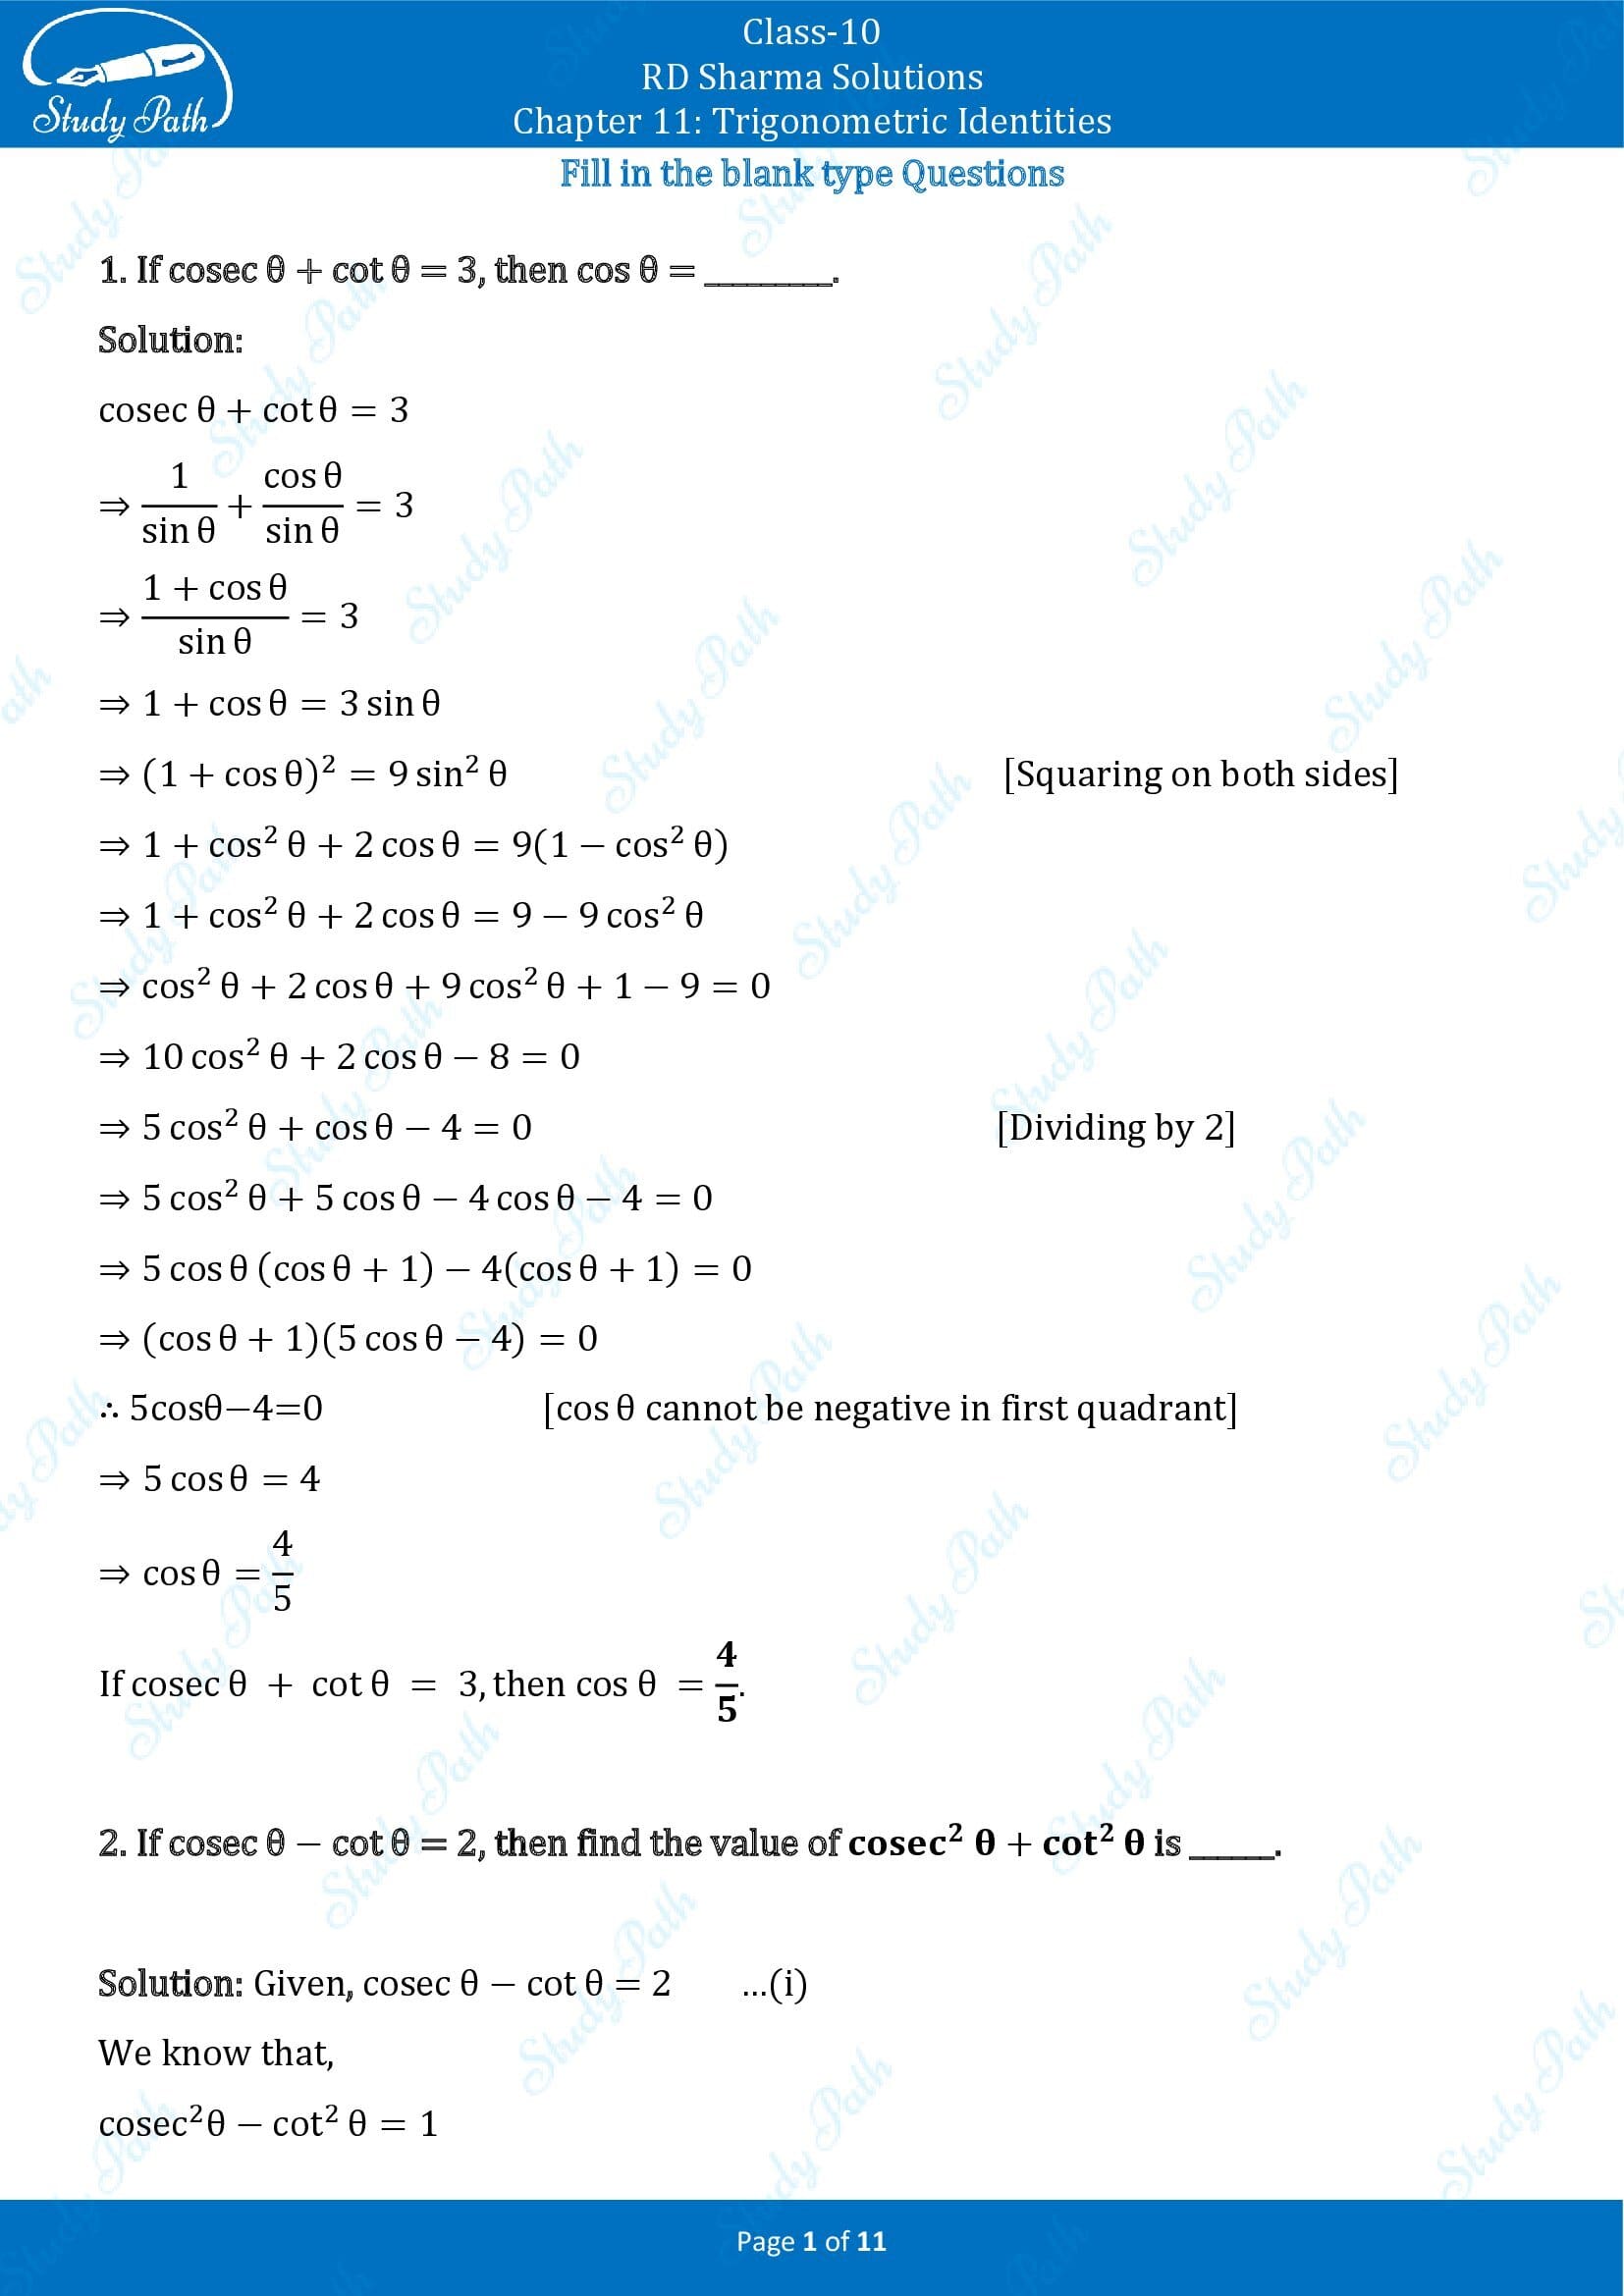 RD Sharma Solutions Class 10 Chapter 11 Trigonometric Identities Fill in the Blank Type Questions FBQs 00001